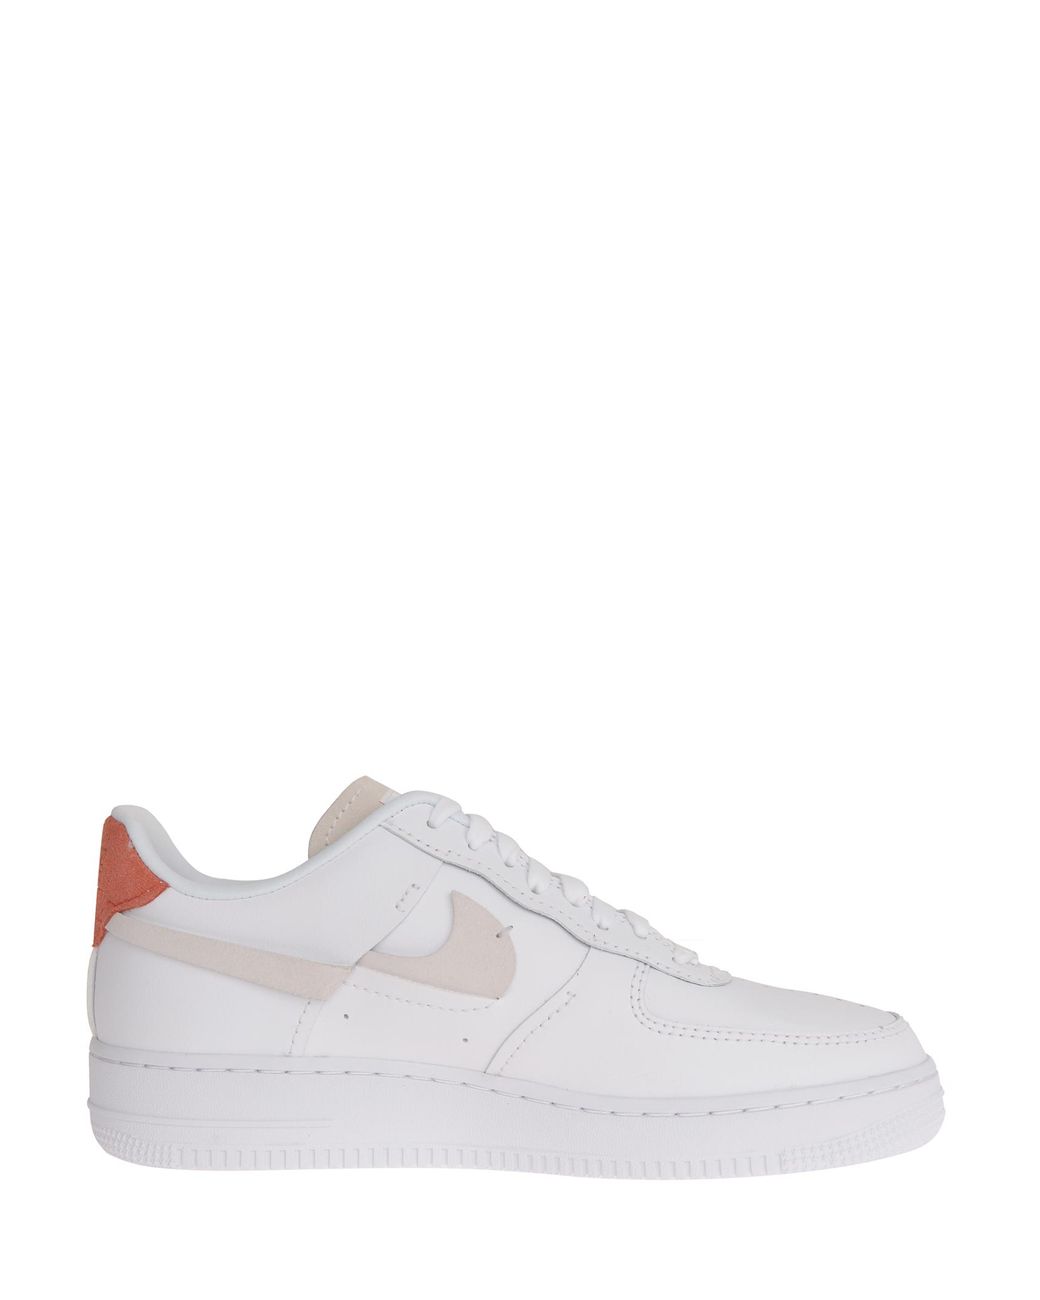 Nike White Air Force 1 '07 Leather Sneakers With Orange Back On One Shoe  And Blue On The Other. | Lyst